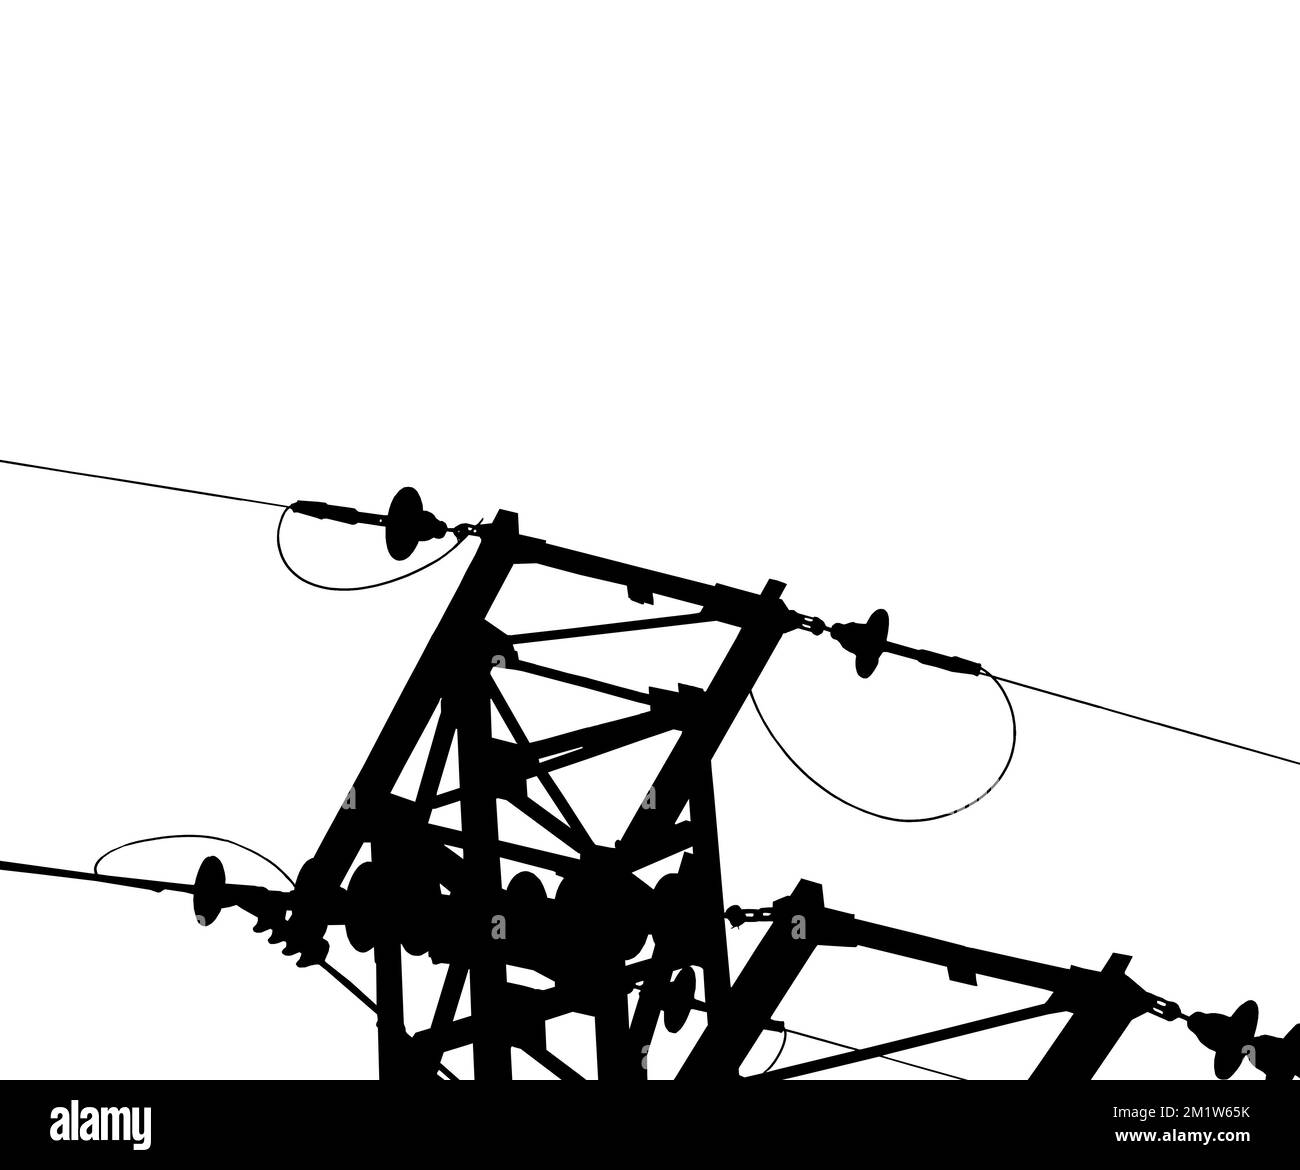 Electricity pylon (high voltage power line), black contour, isolated, on a white background Stock Photo